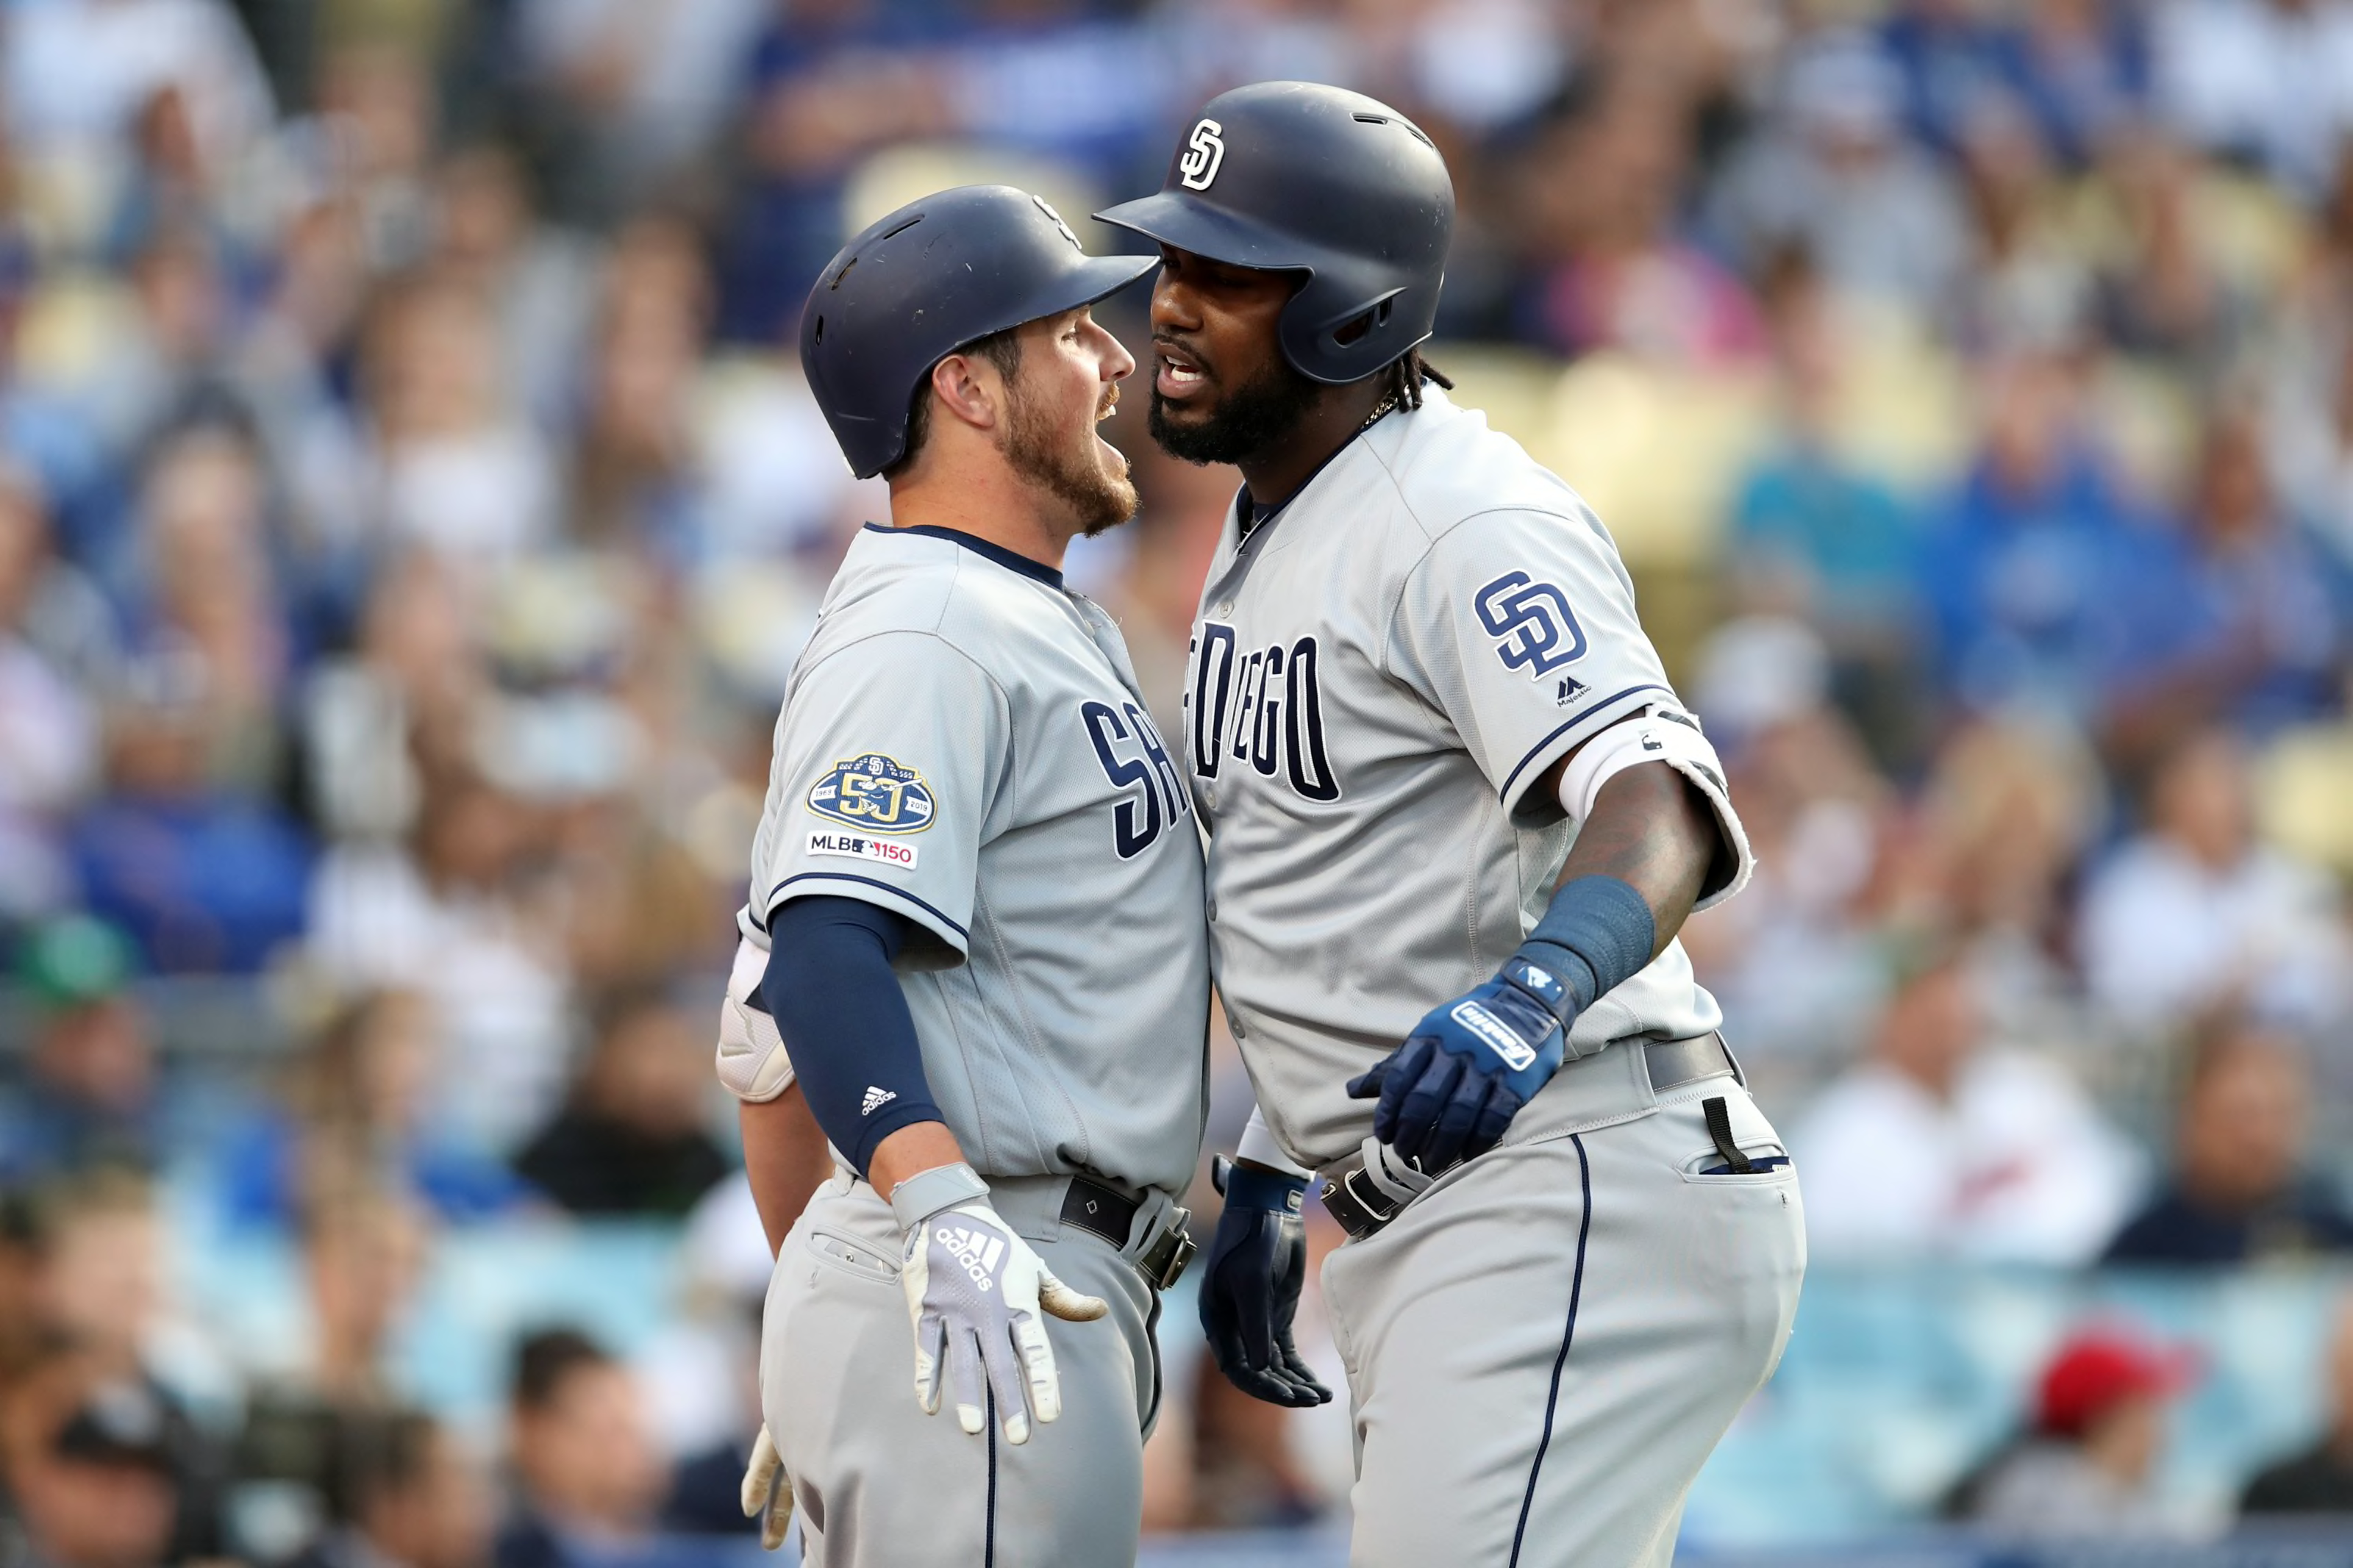 San Diego Padres: Who Will Make the ASG and Home Run Derby